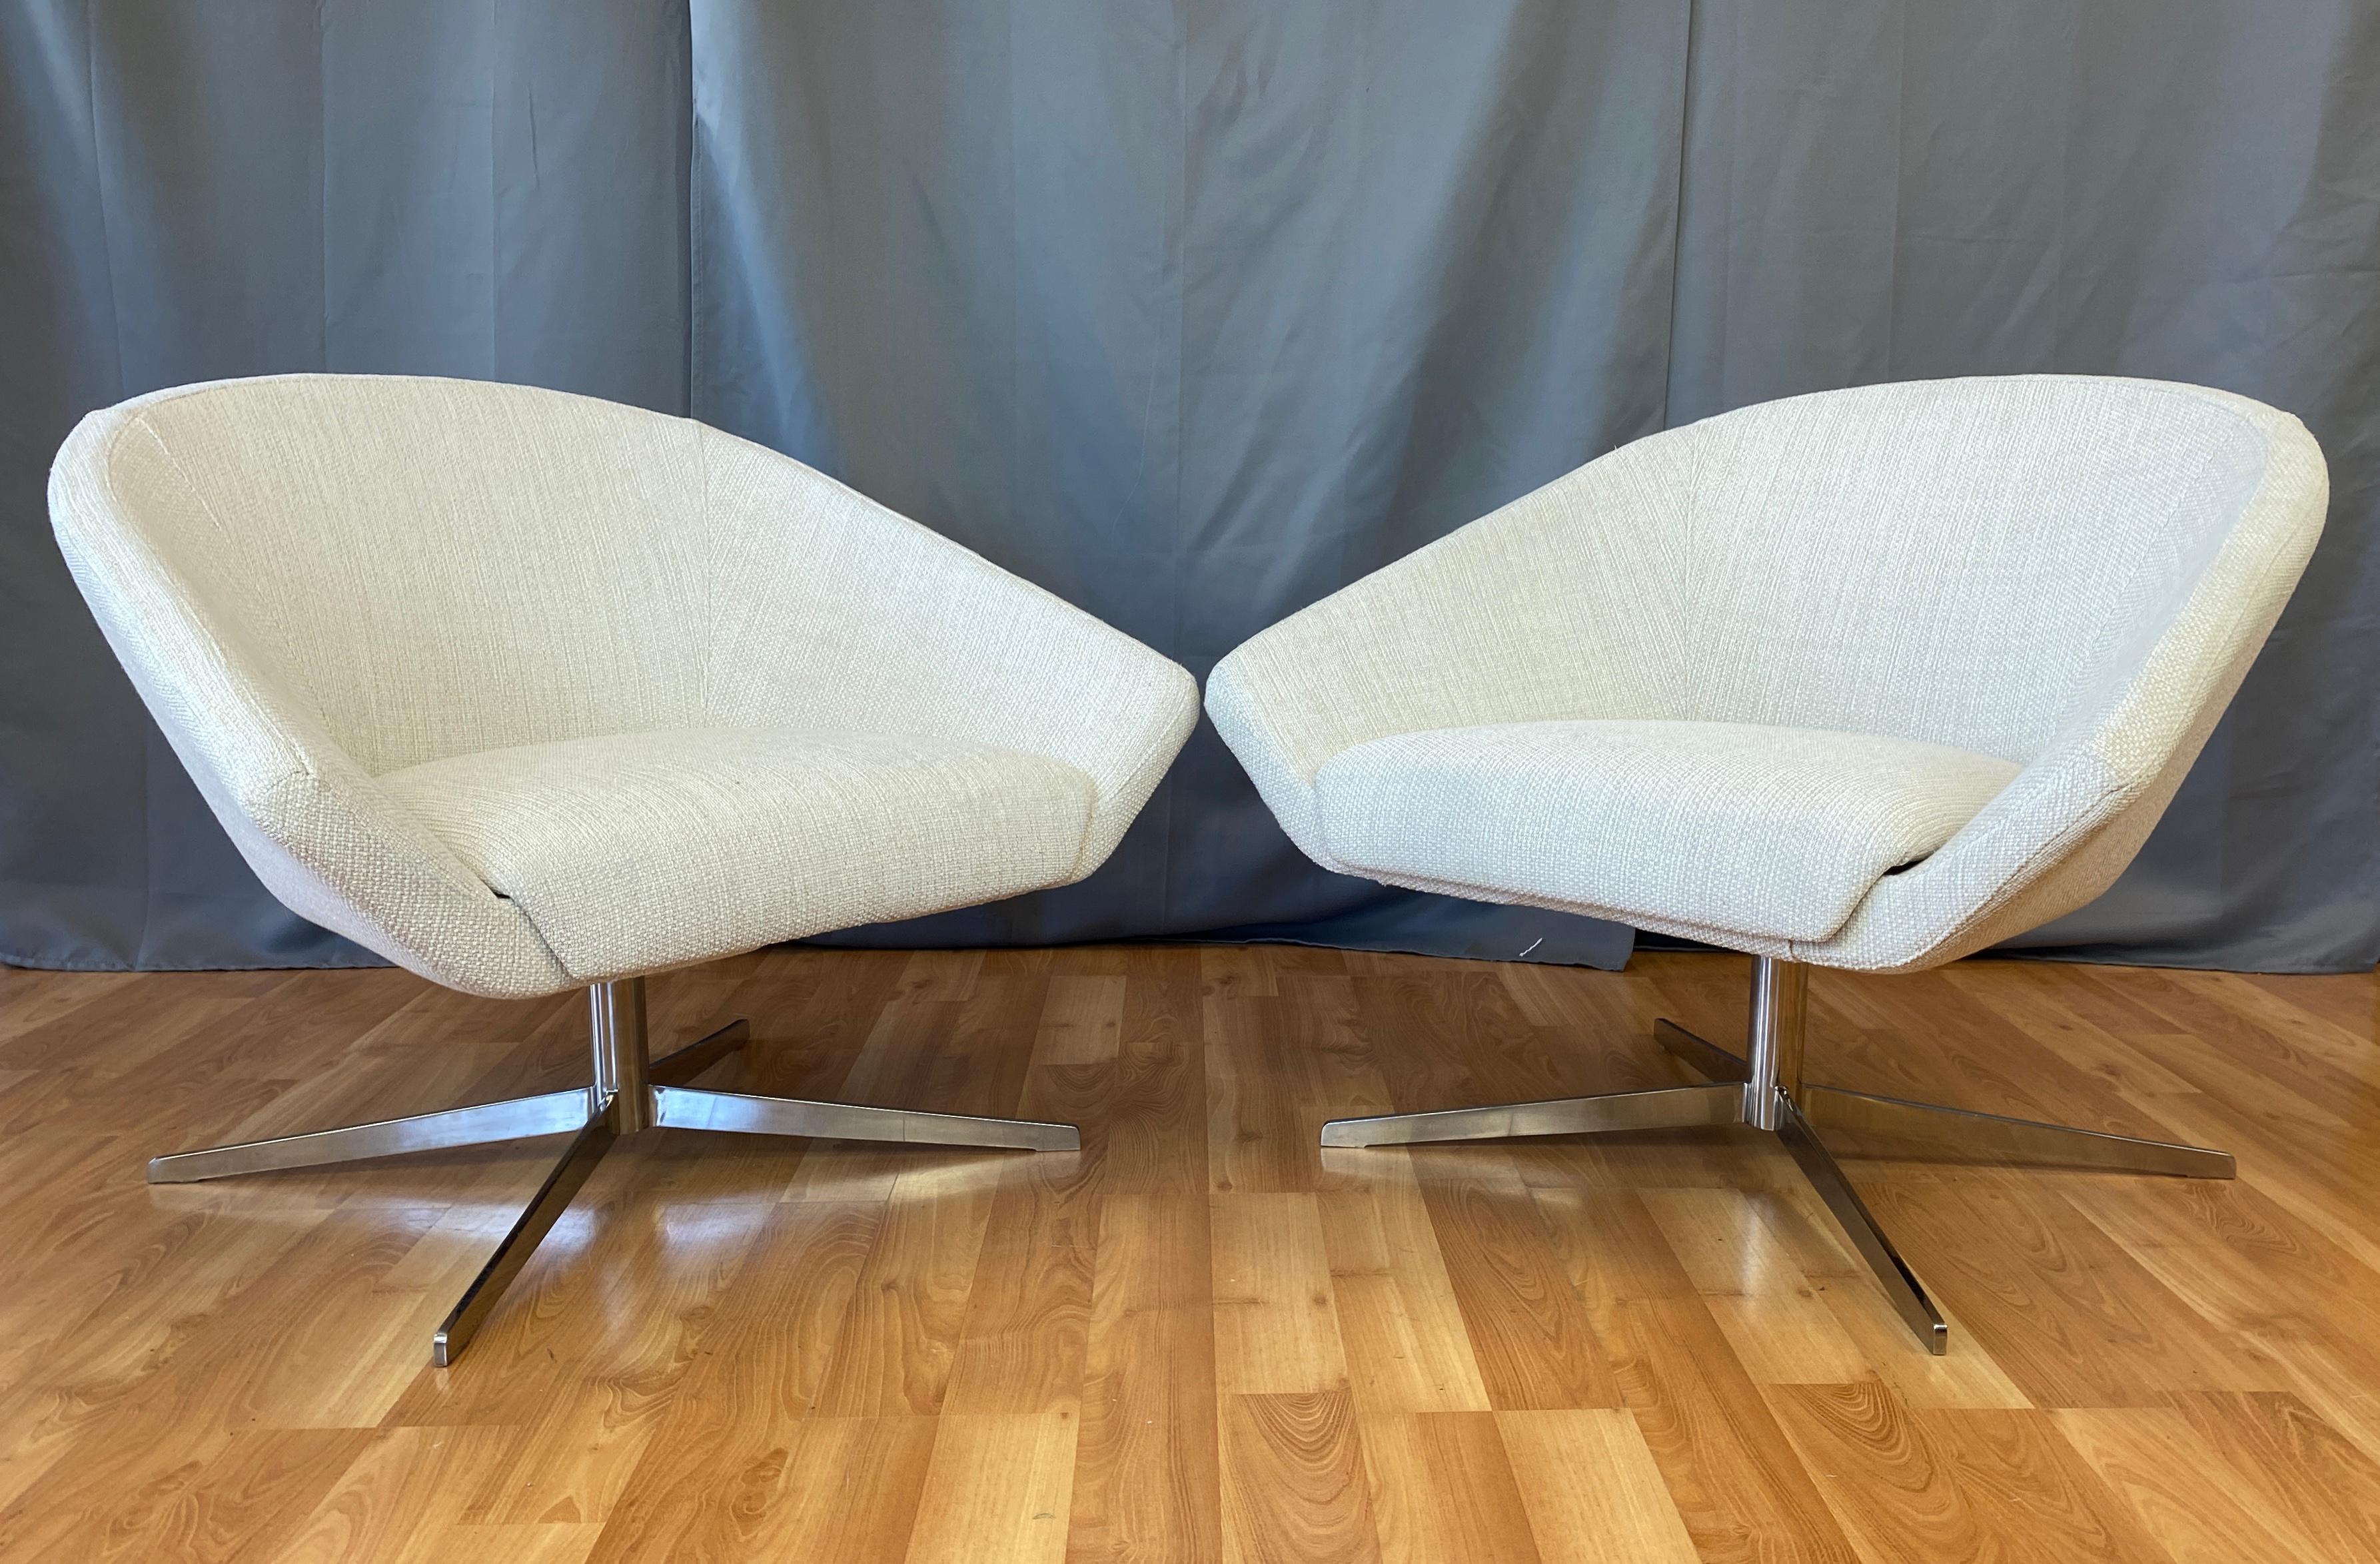 Pair of Remy Lounge Chairs by Jeffrey Bernett for Bernhardt Design 5